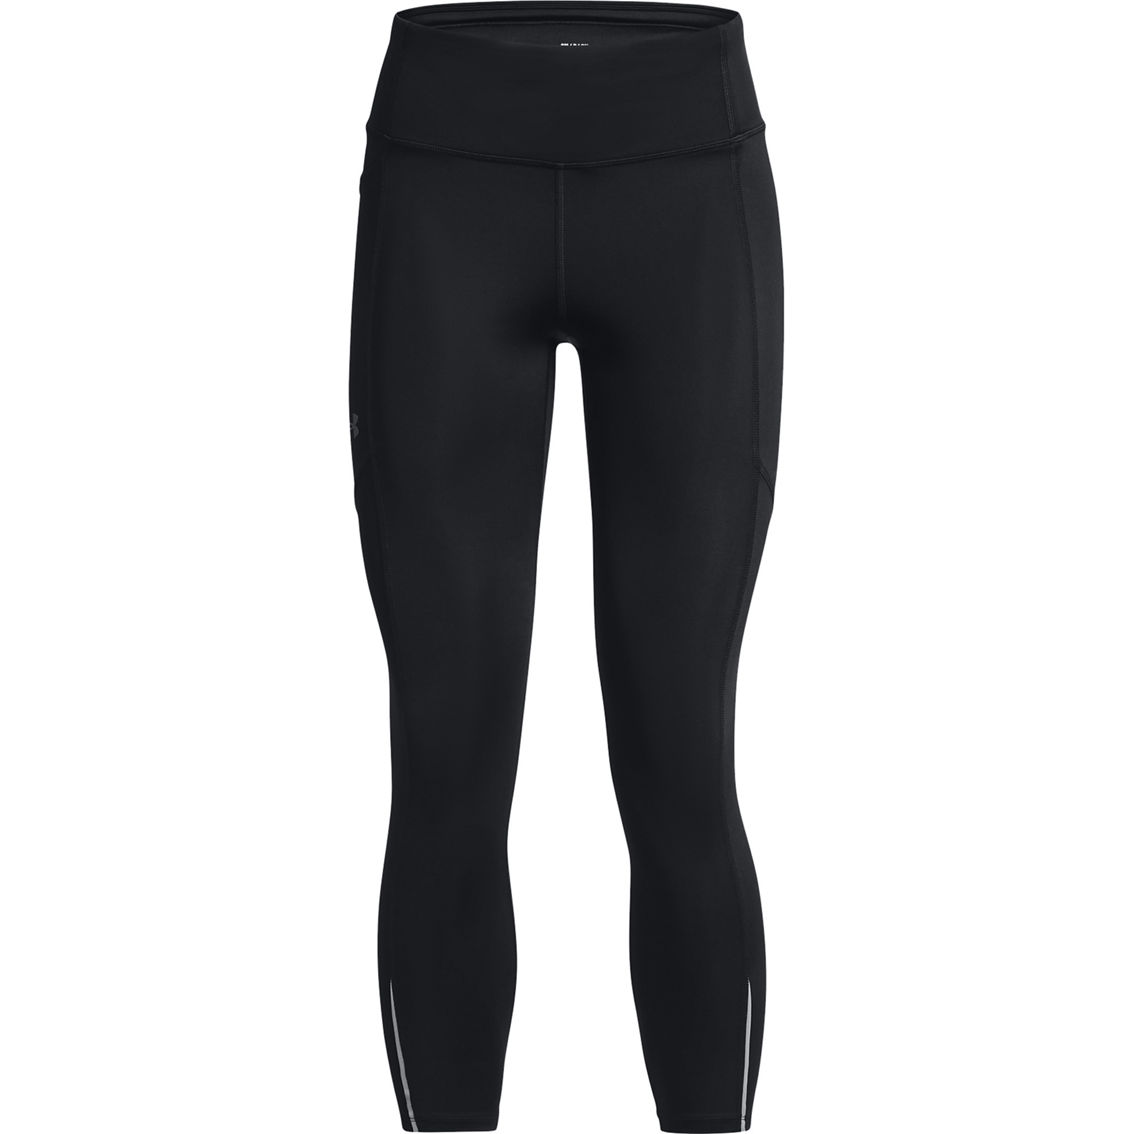 Under Armour Launch Ankle Tights - Image 7 of 8